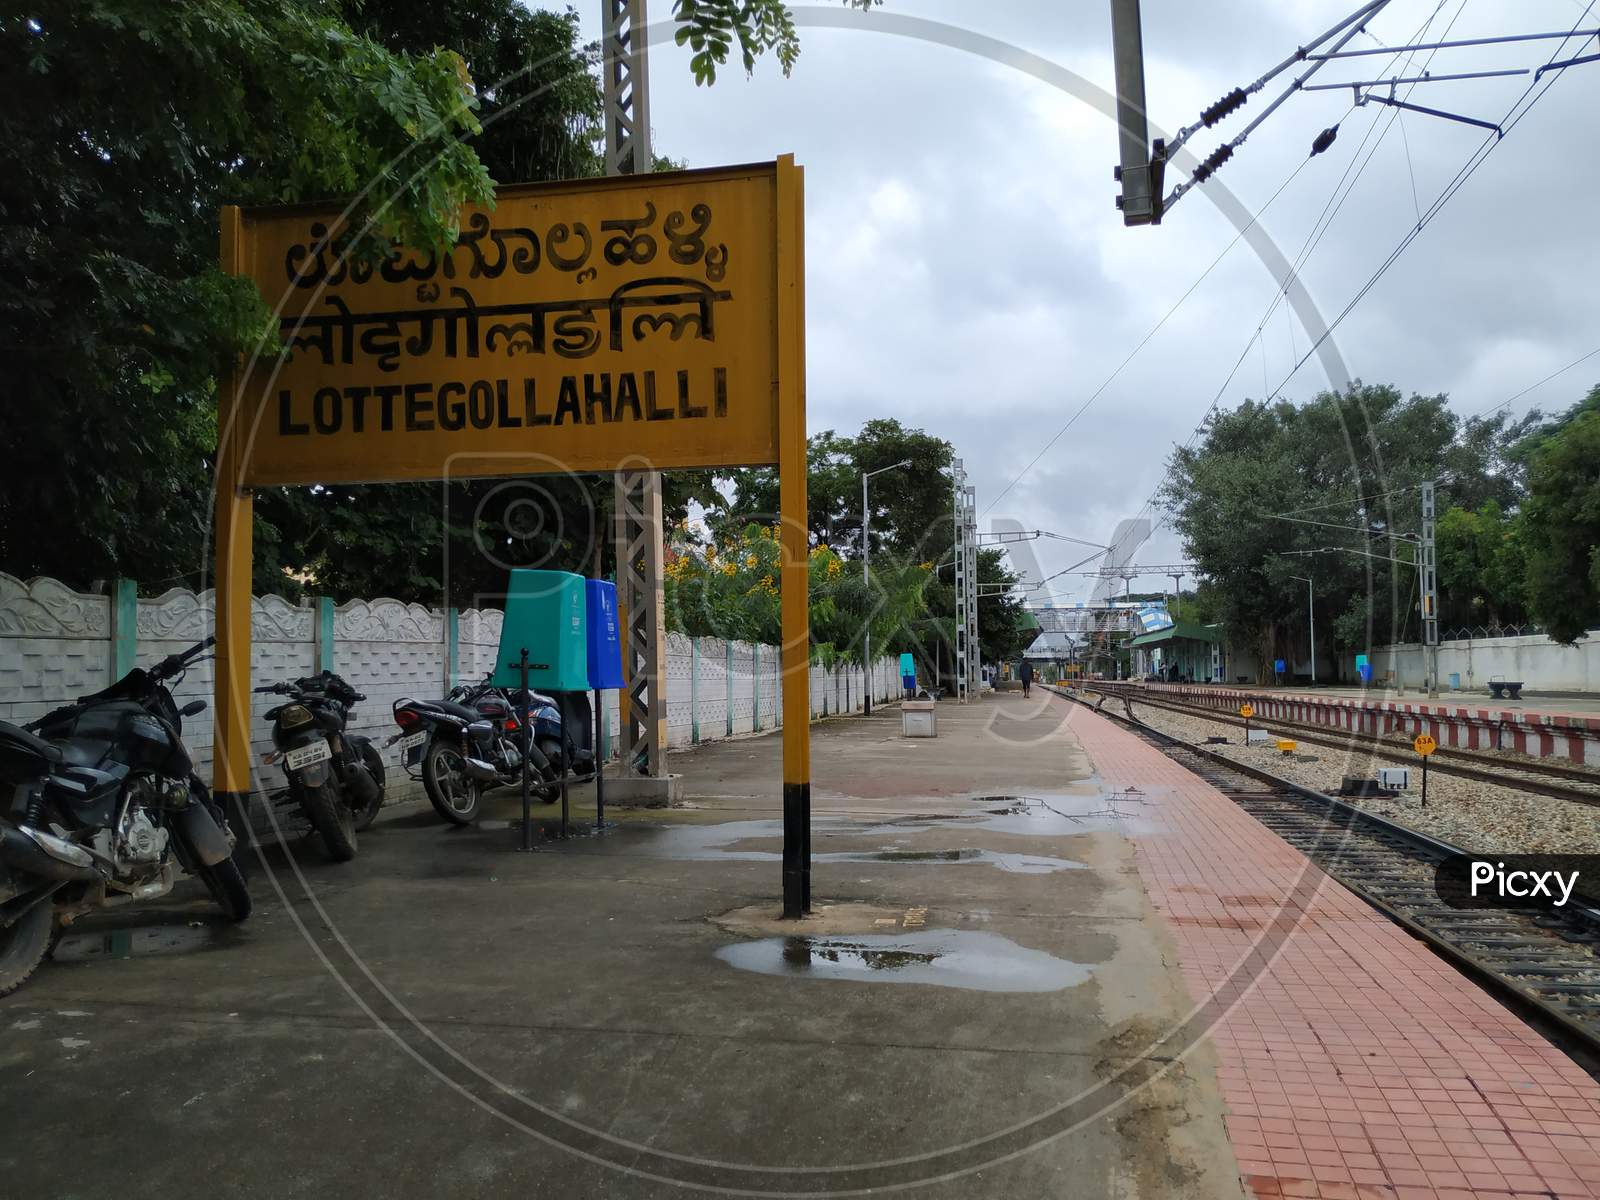 Closeup of Lottegollahalli Railway Station with Yellow and black Color Name Board